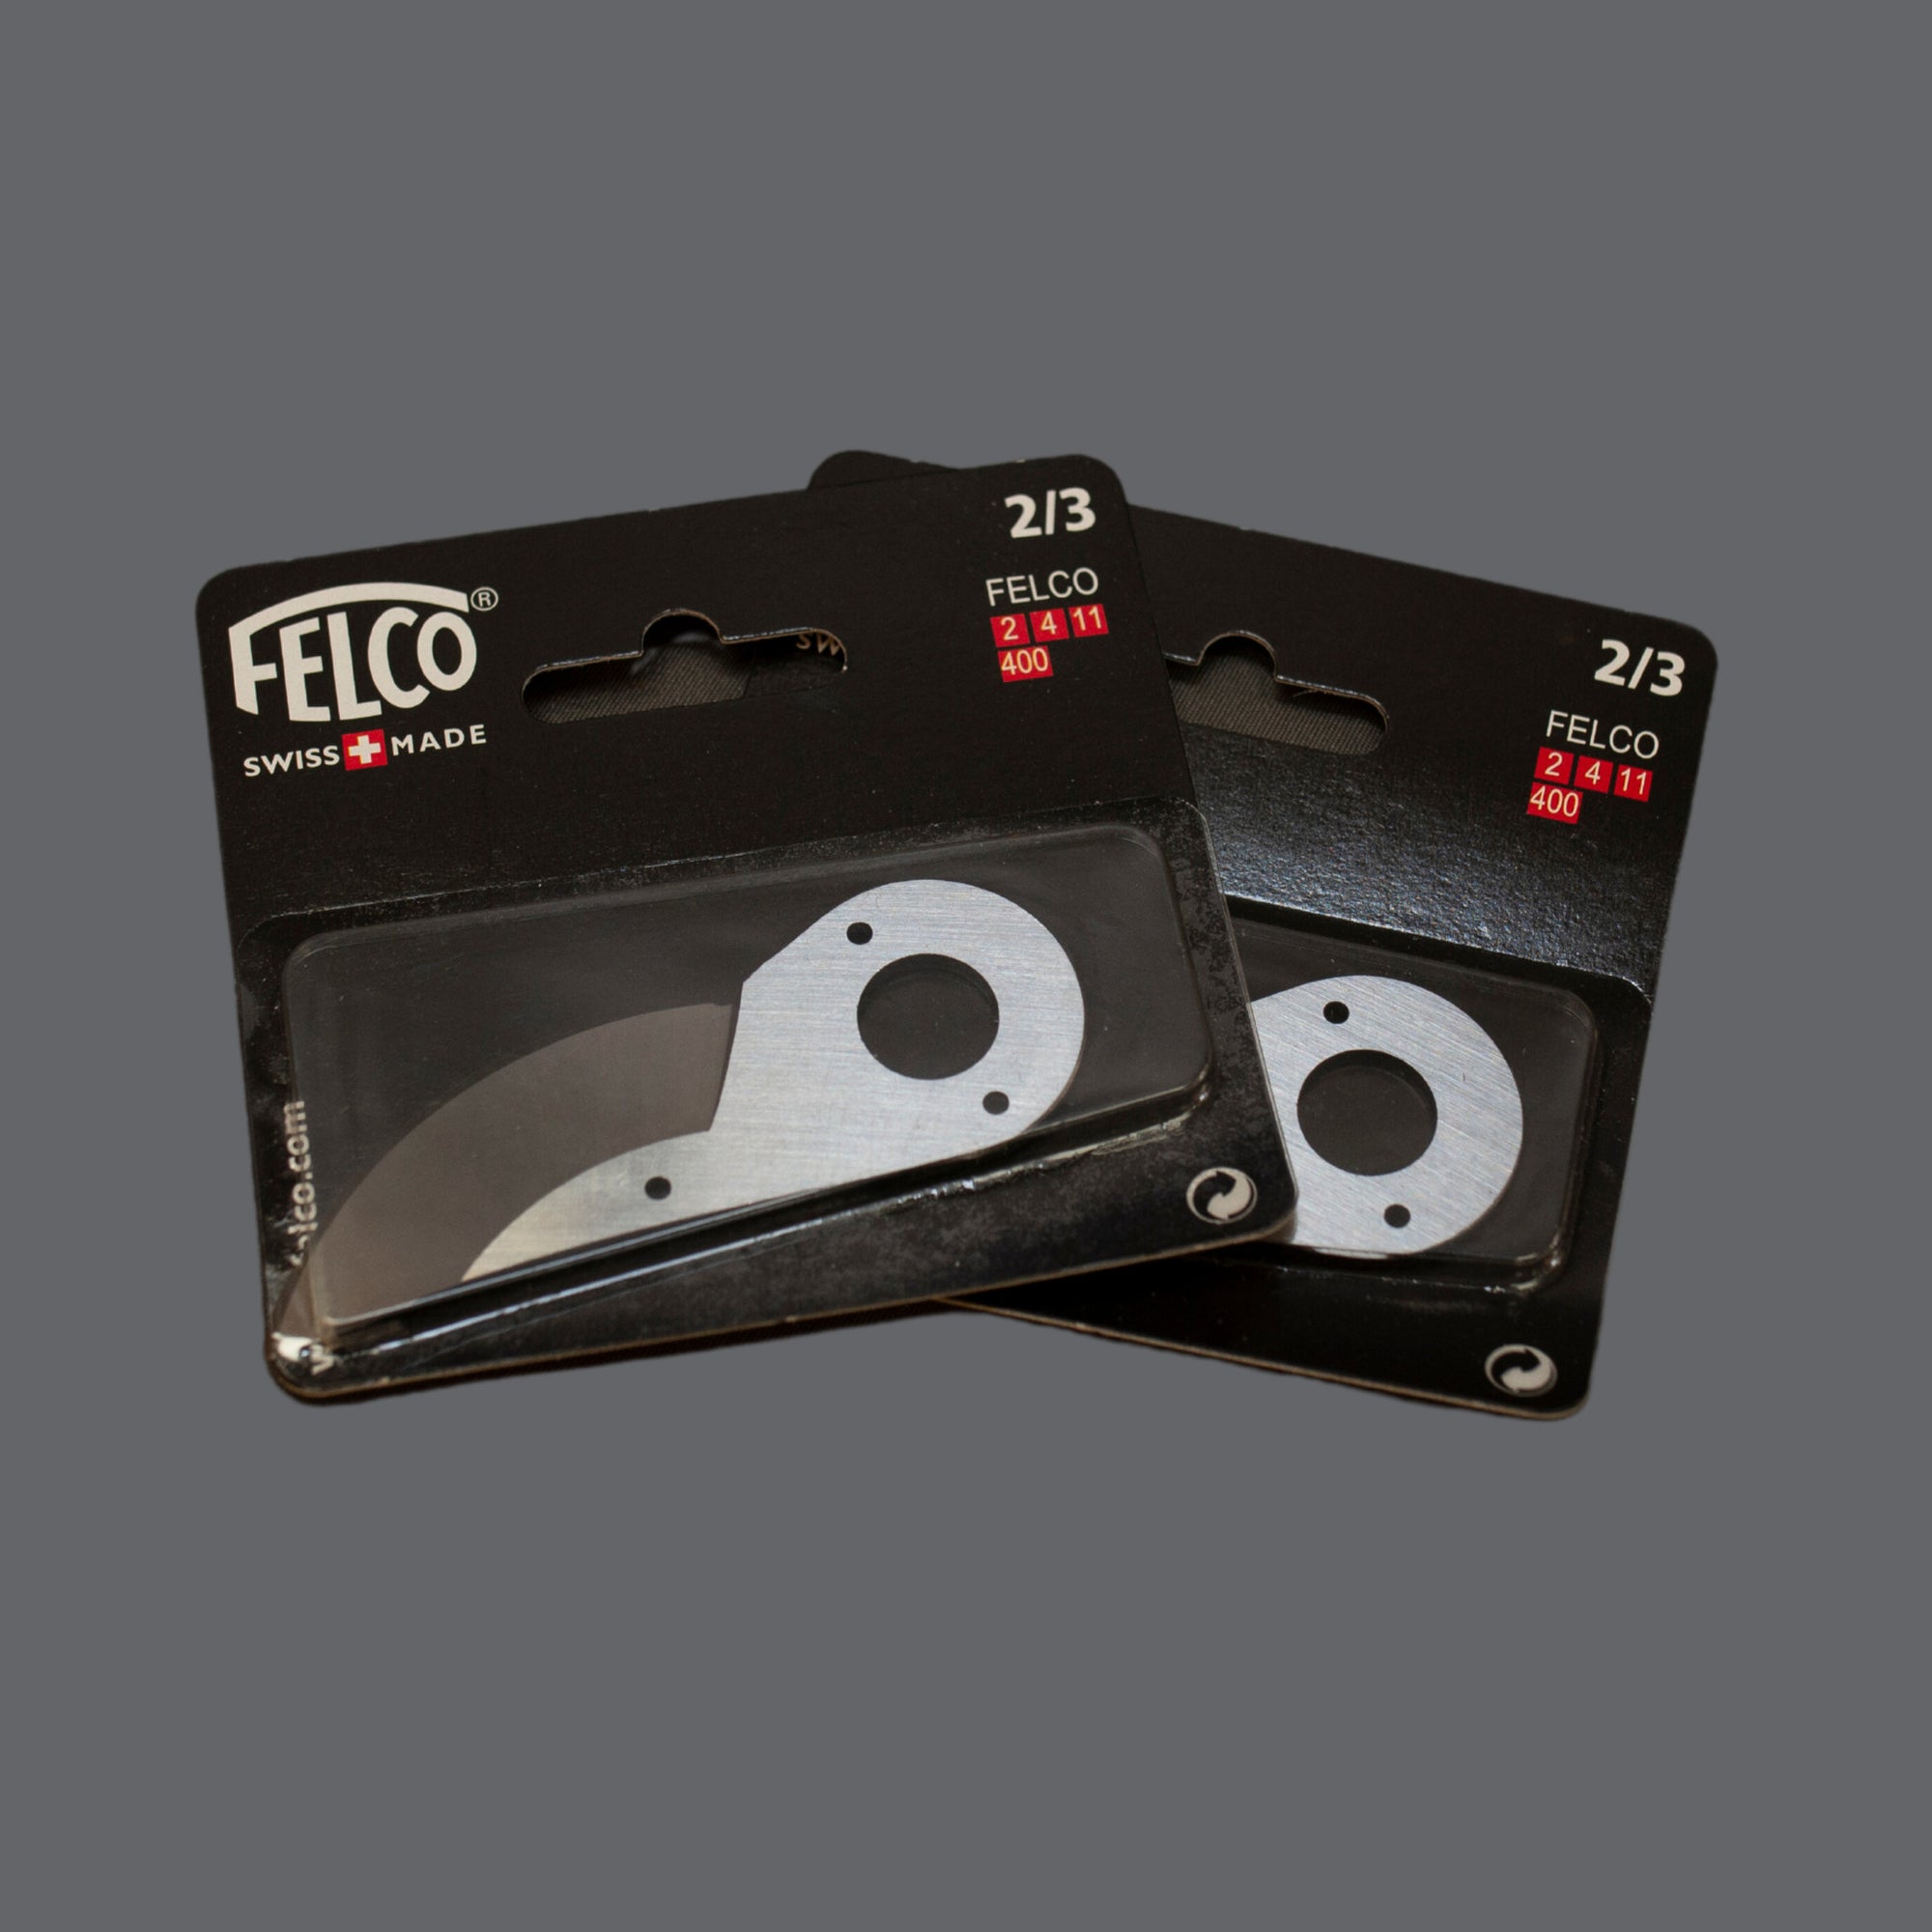 Felco Replacement Cutting Blade